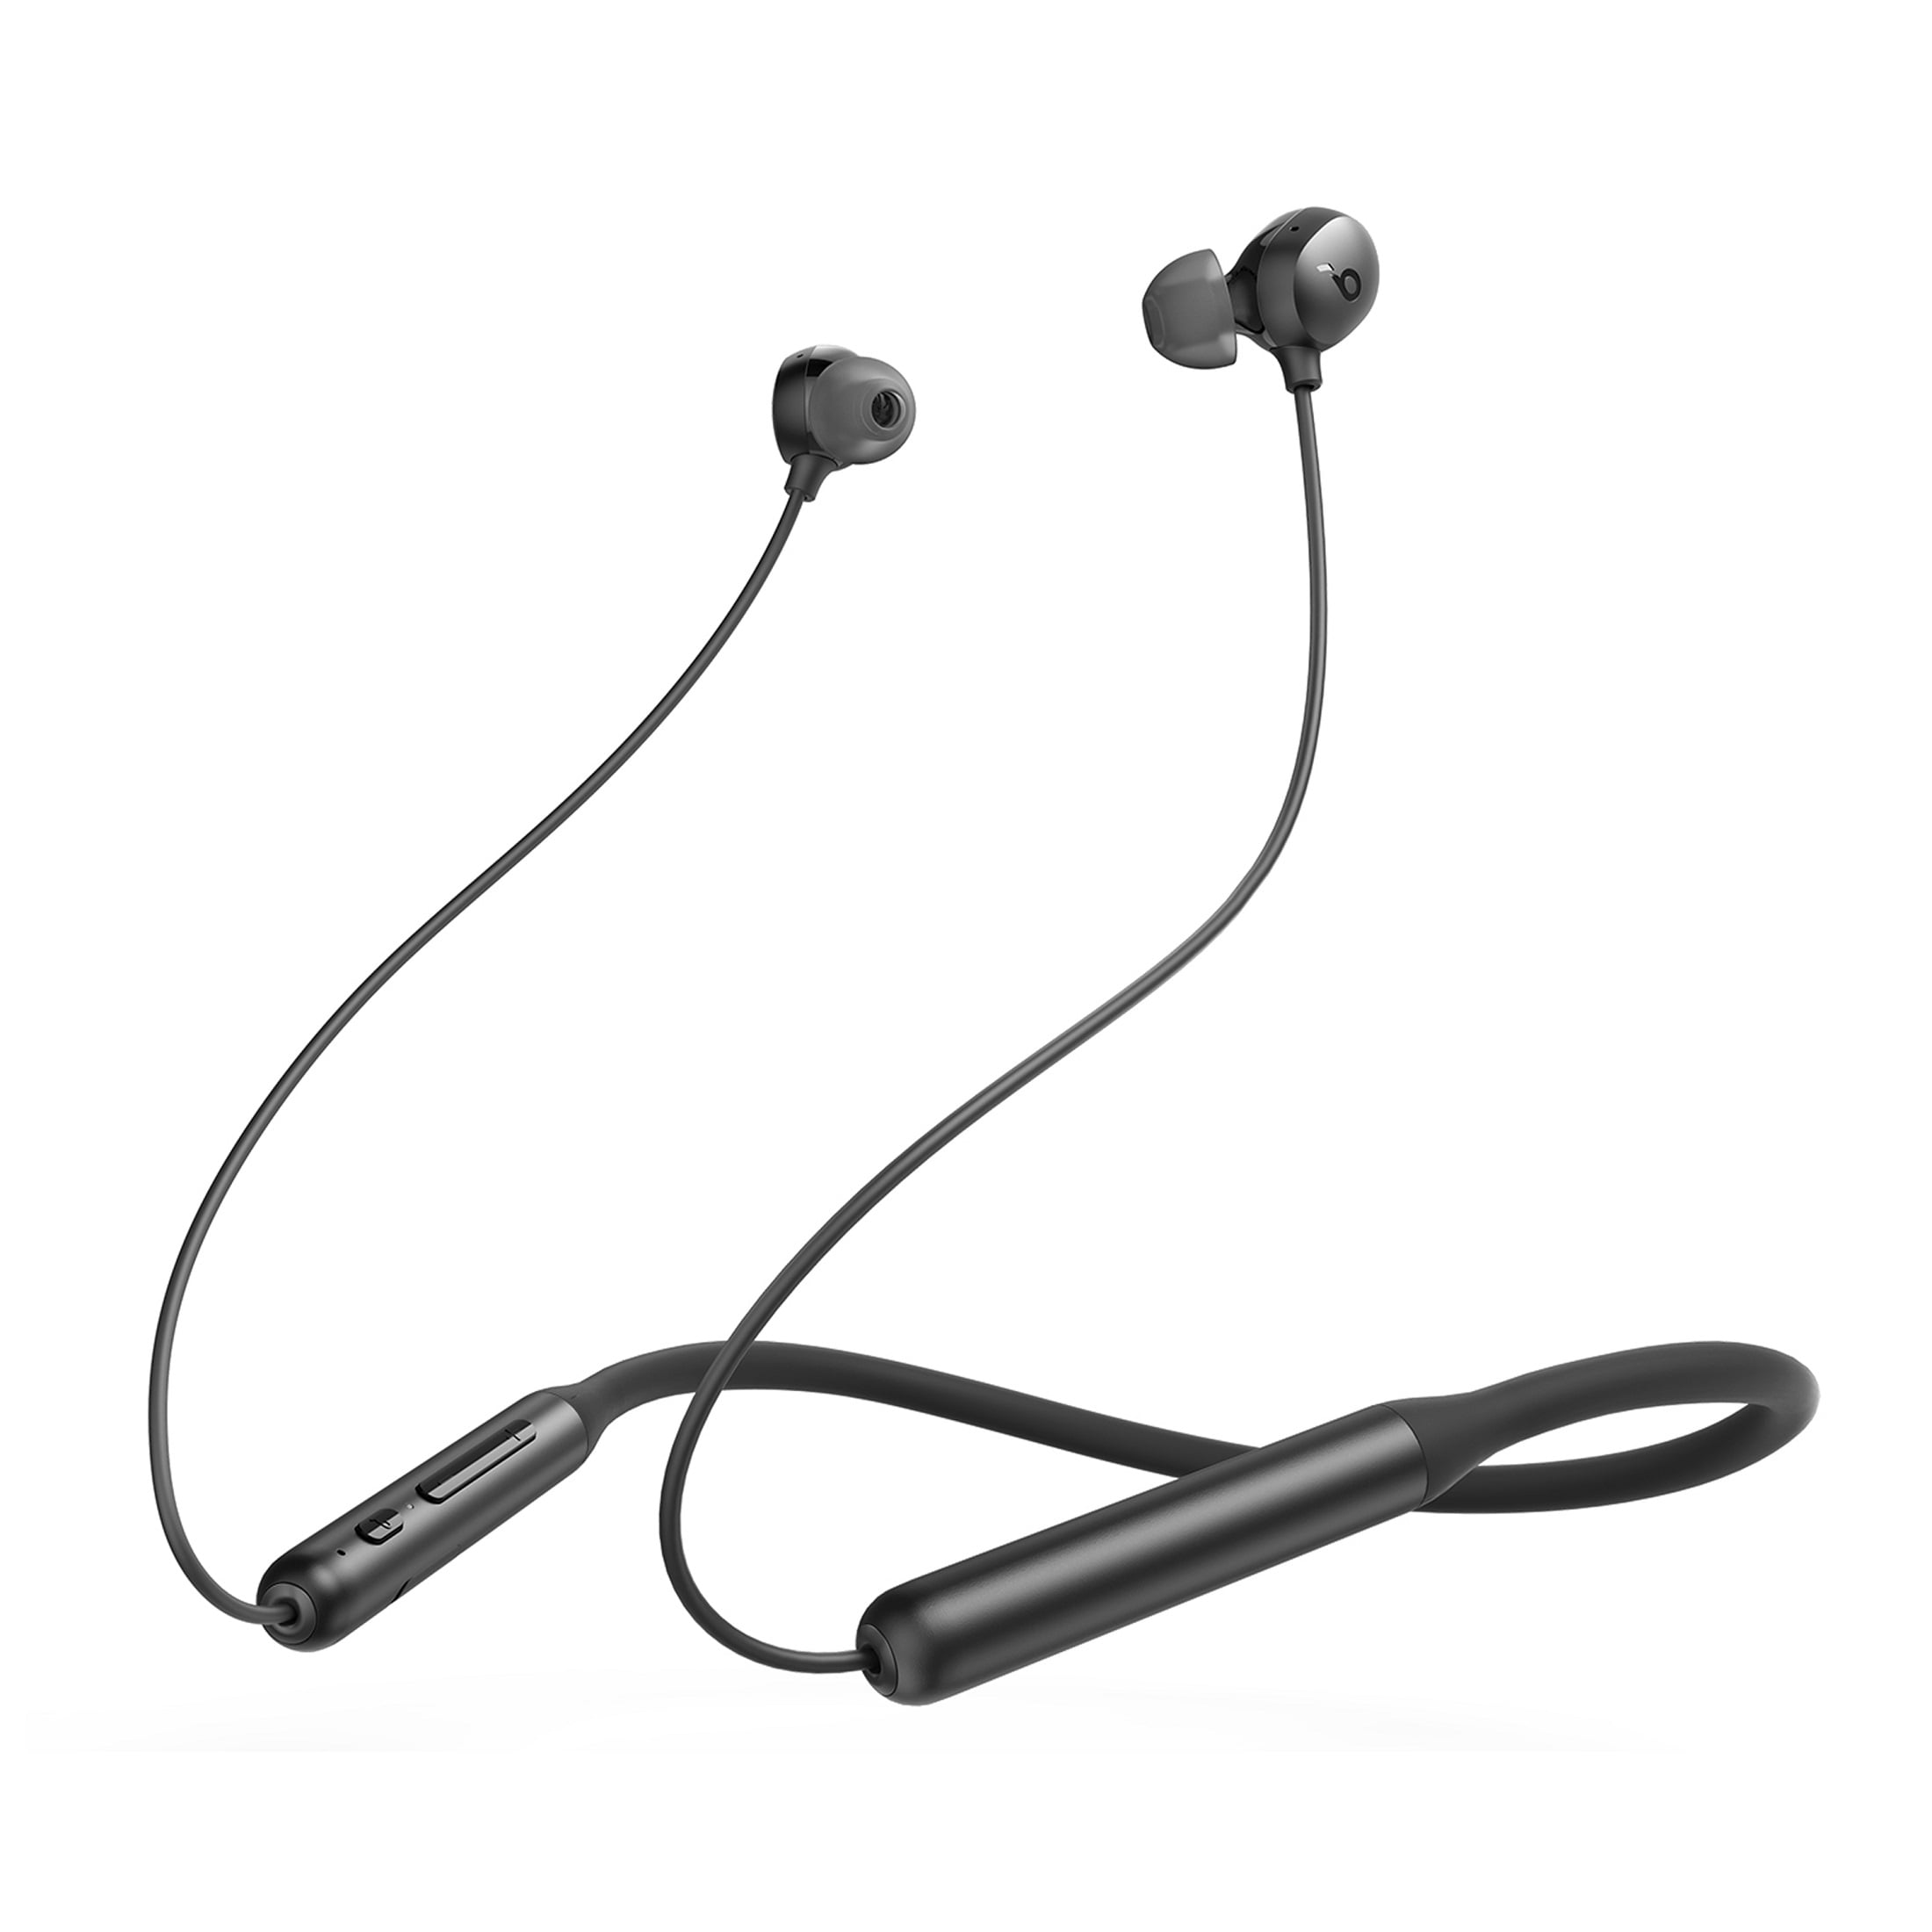 Soundcore by Anker Life P3 Noise Cancelling Earbuds, Ultra Long